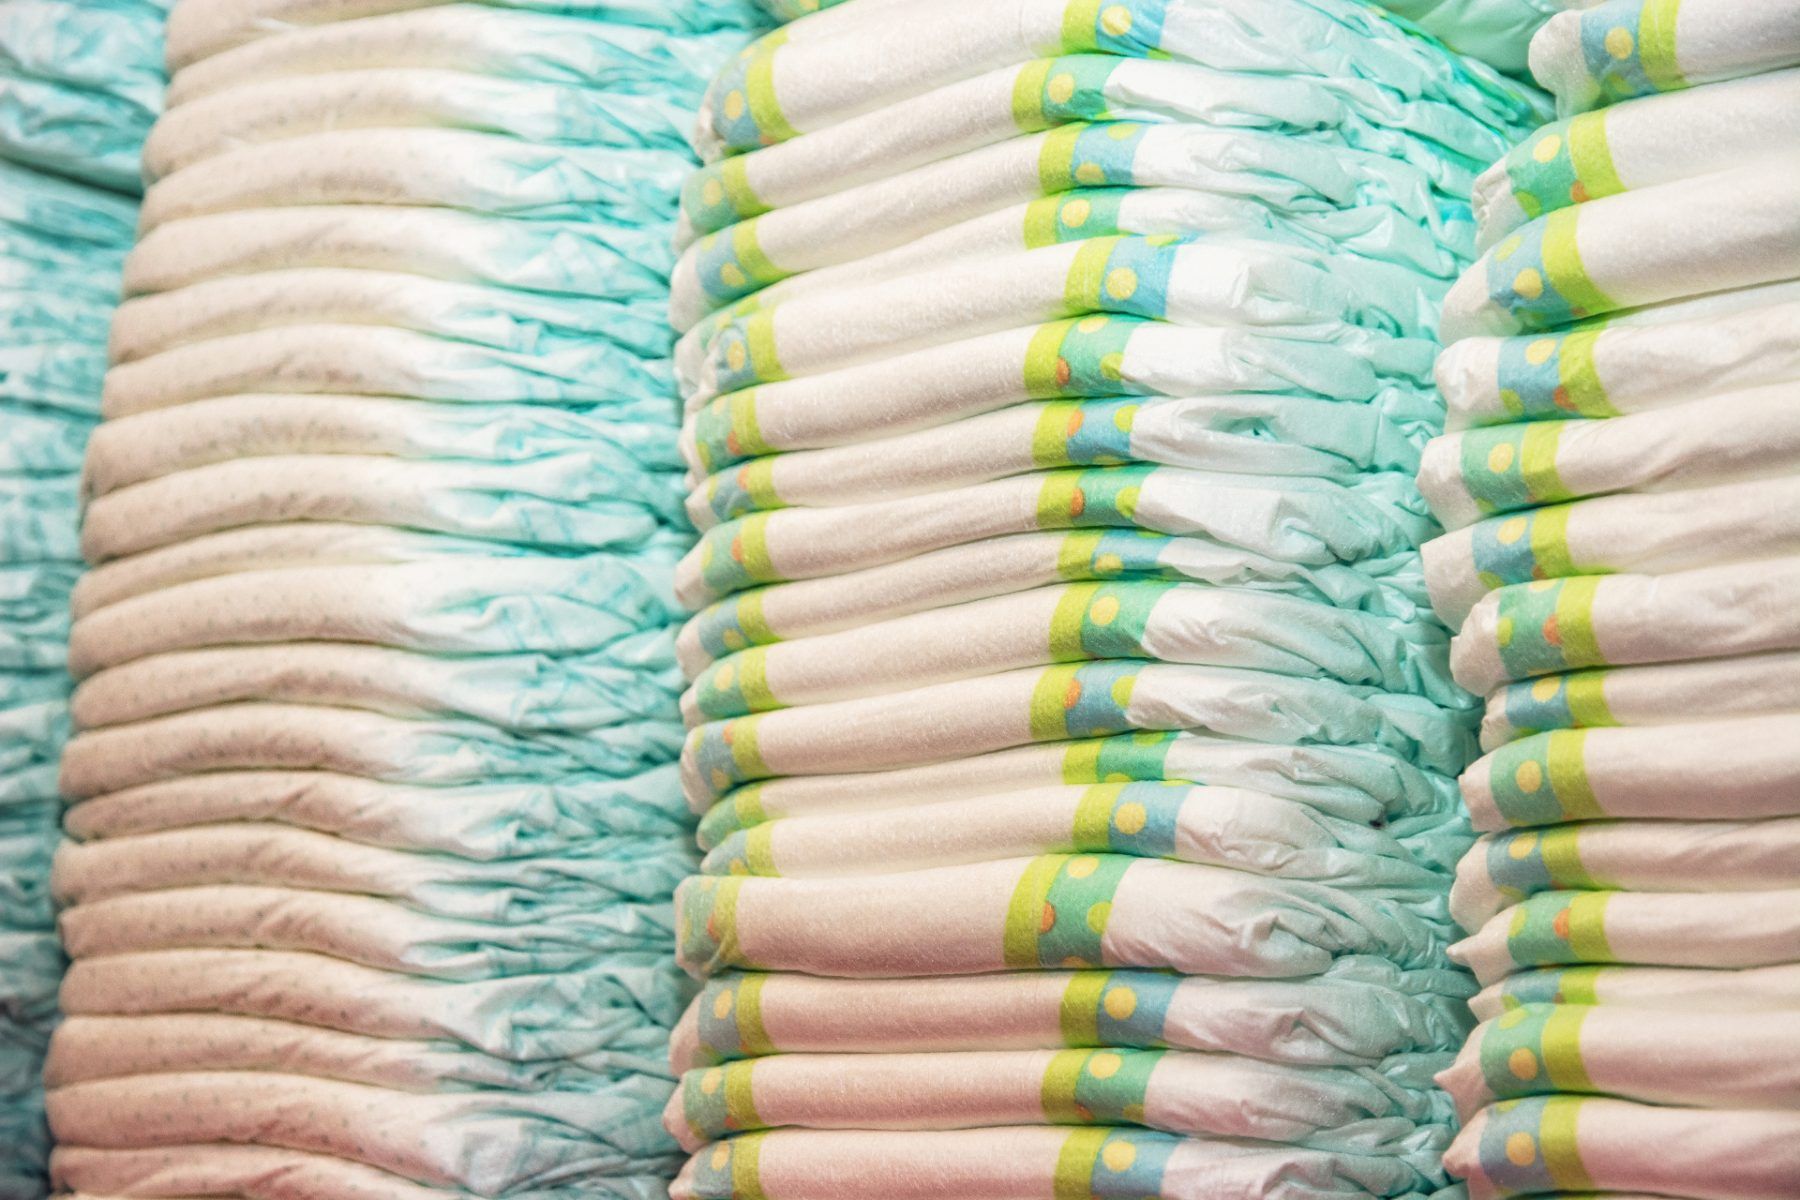 Stacks of diapers - Aldi nappies